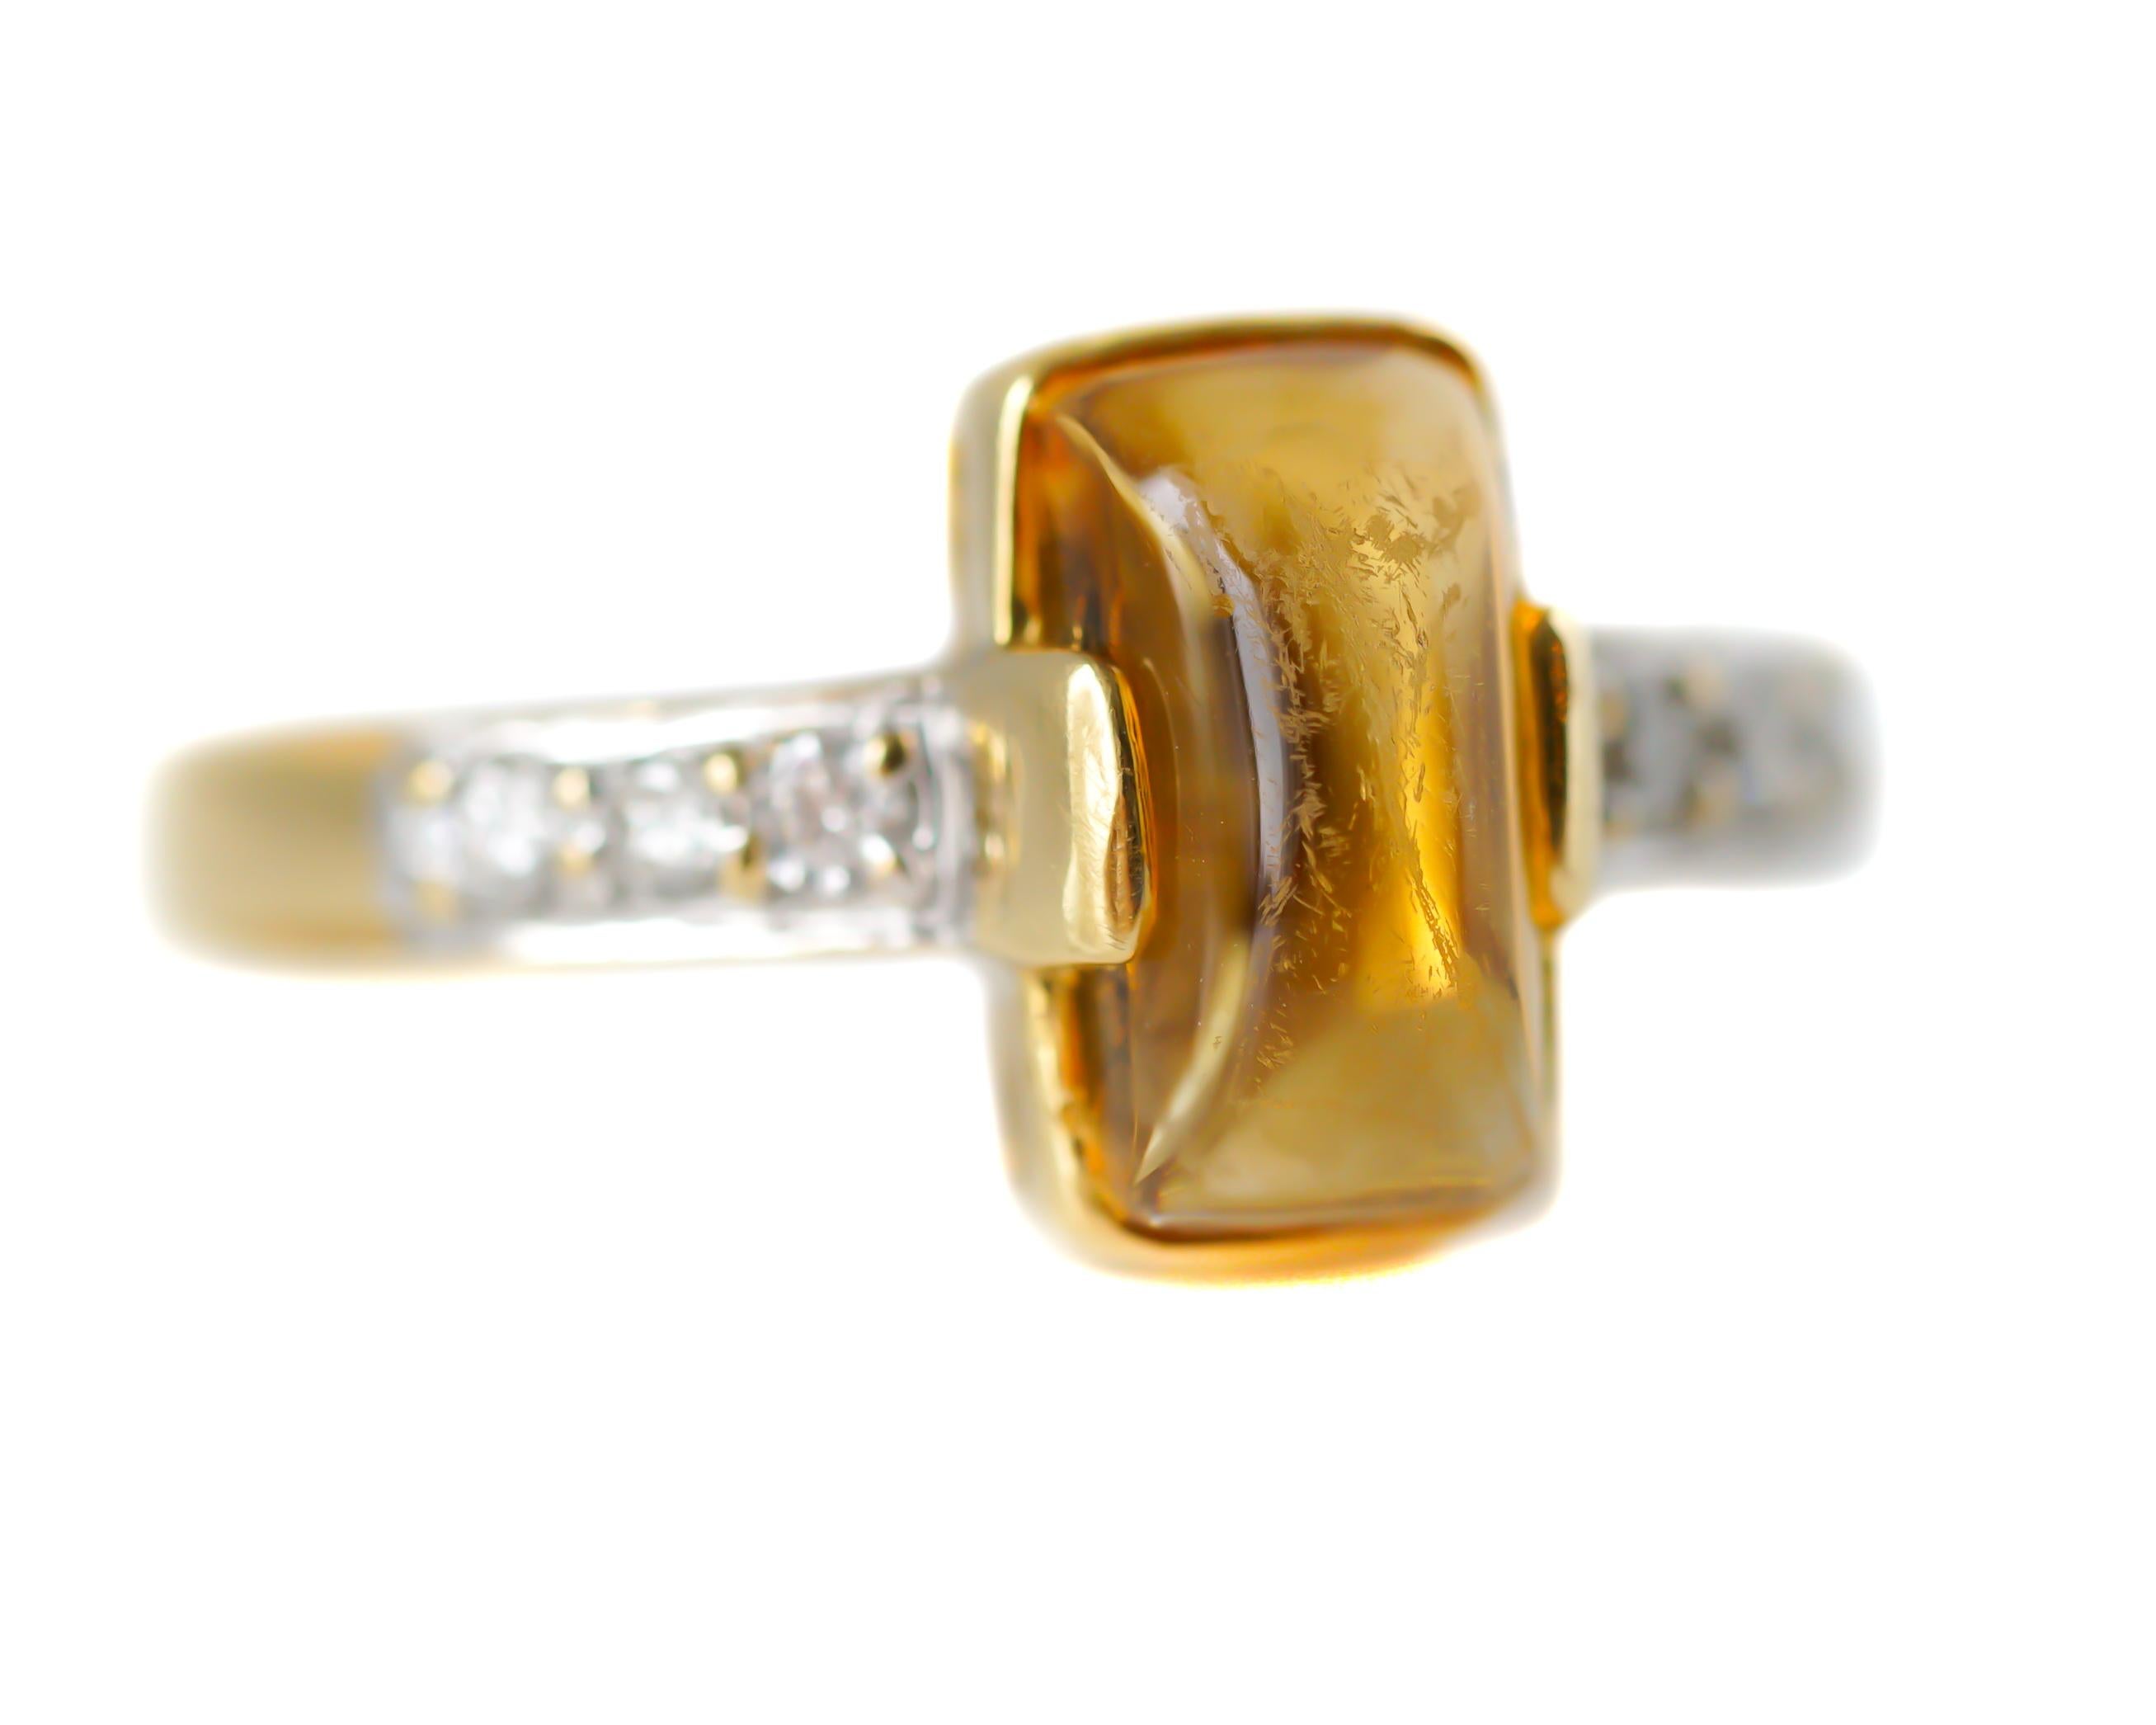 This beautiful 18 karat yellow gold ring features a 1 Carat Yellow Sapphire cabochon center stone with 0.08 carat total Round Brilliant Diamond-set shoulders. The rich 18 karat gold elegantly accents the gorgeous gemstones, brightening the diamonds